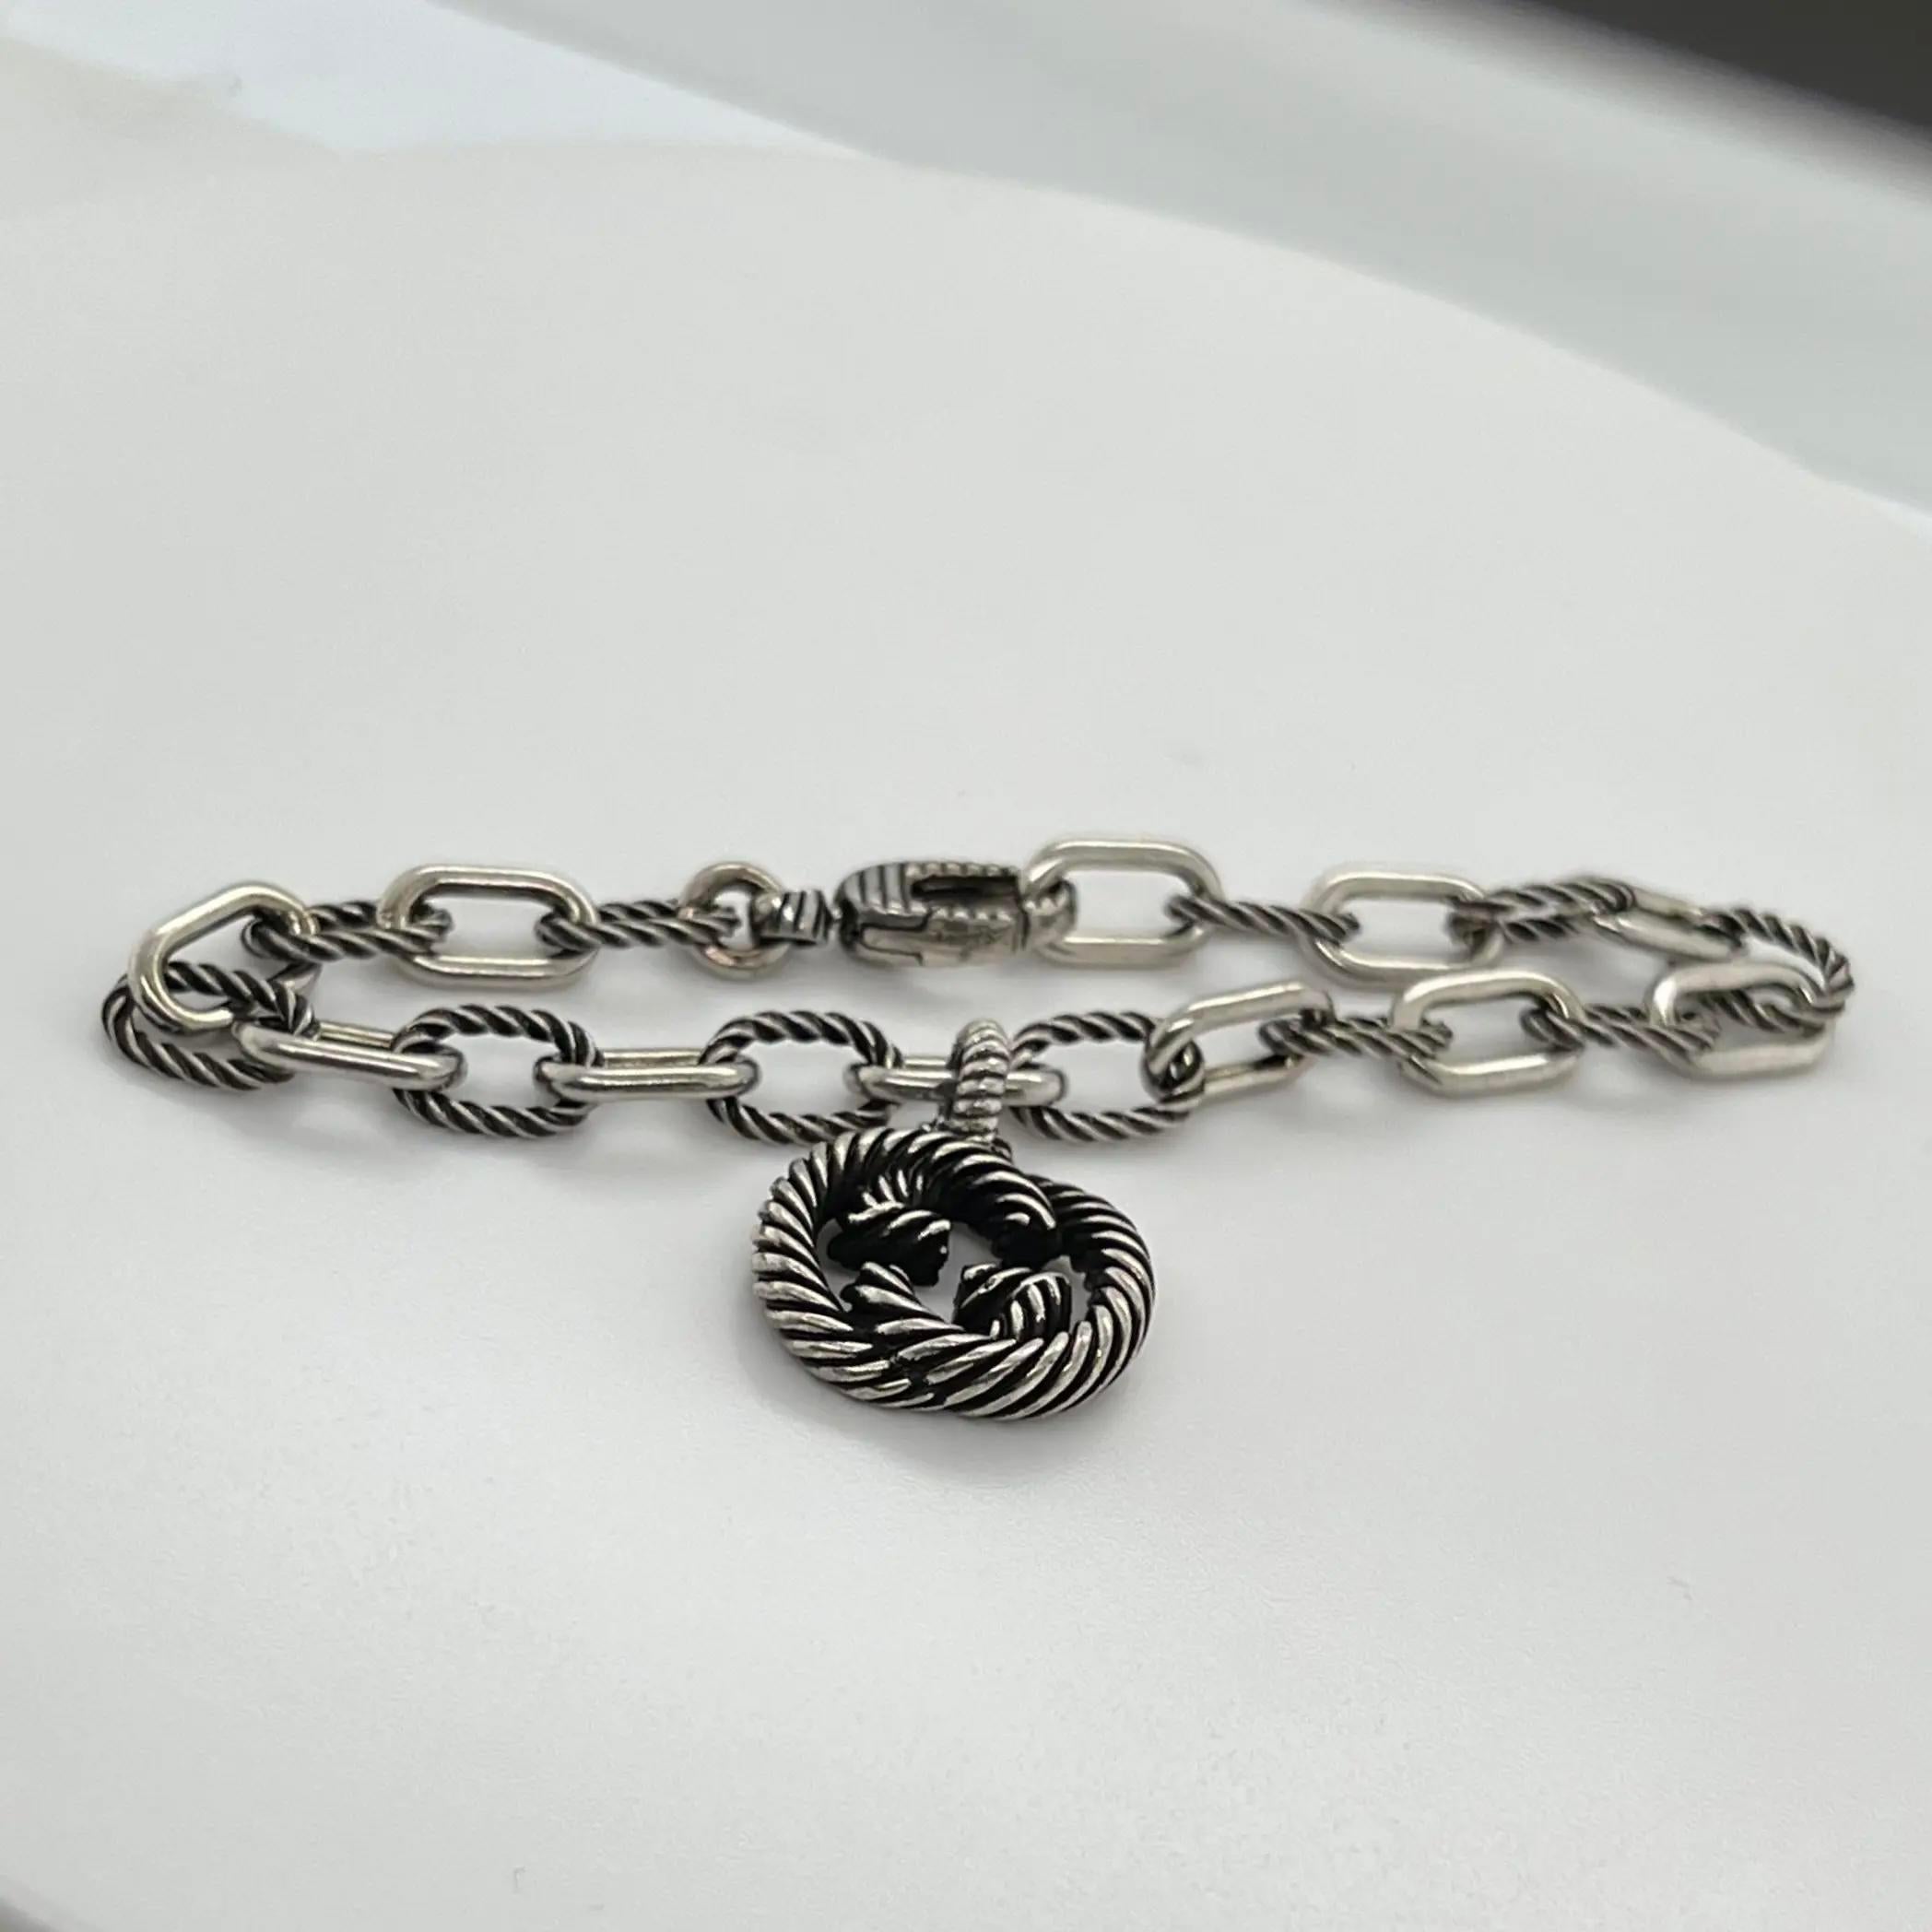 This GUCCI bracelet features an interlocking G twisted charm hanging at the center with an aged finished twisted link chain. Designed in 925 Sterling Silver. Bracelet length: 7 Inches. Total weight: 14.81 grams. Made in Italy. Unworn condition. The